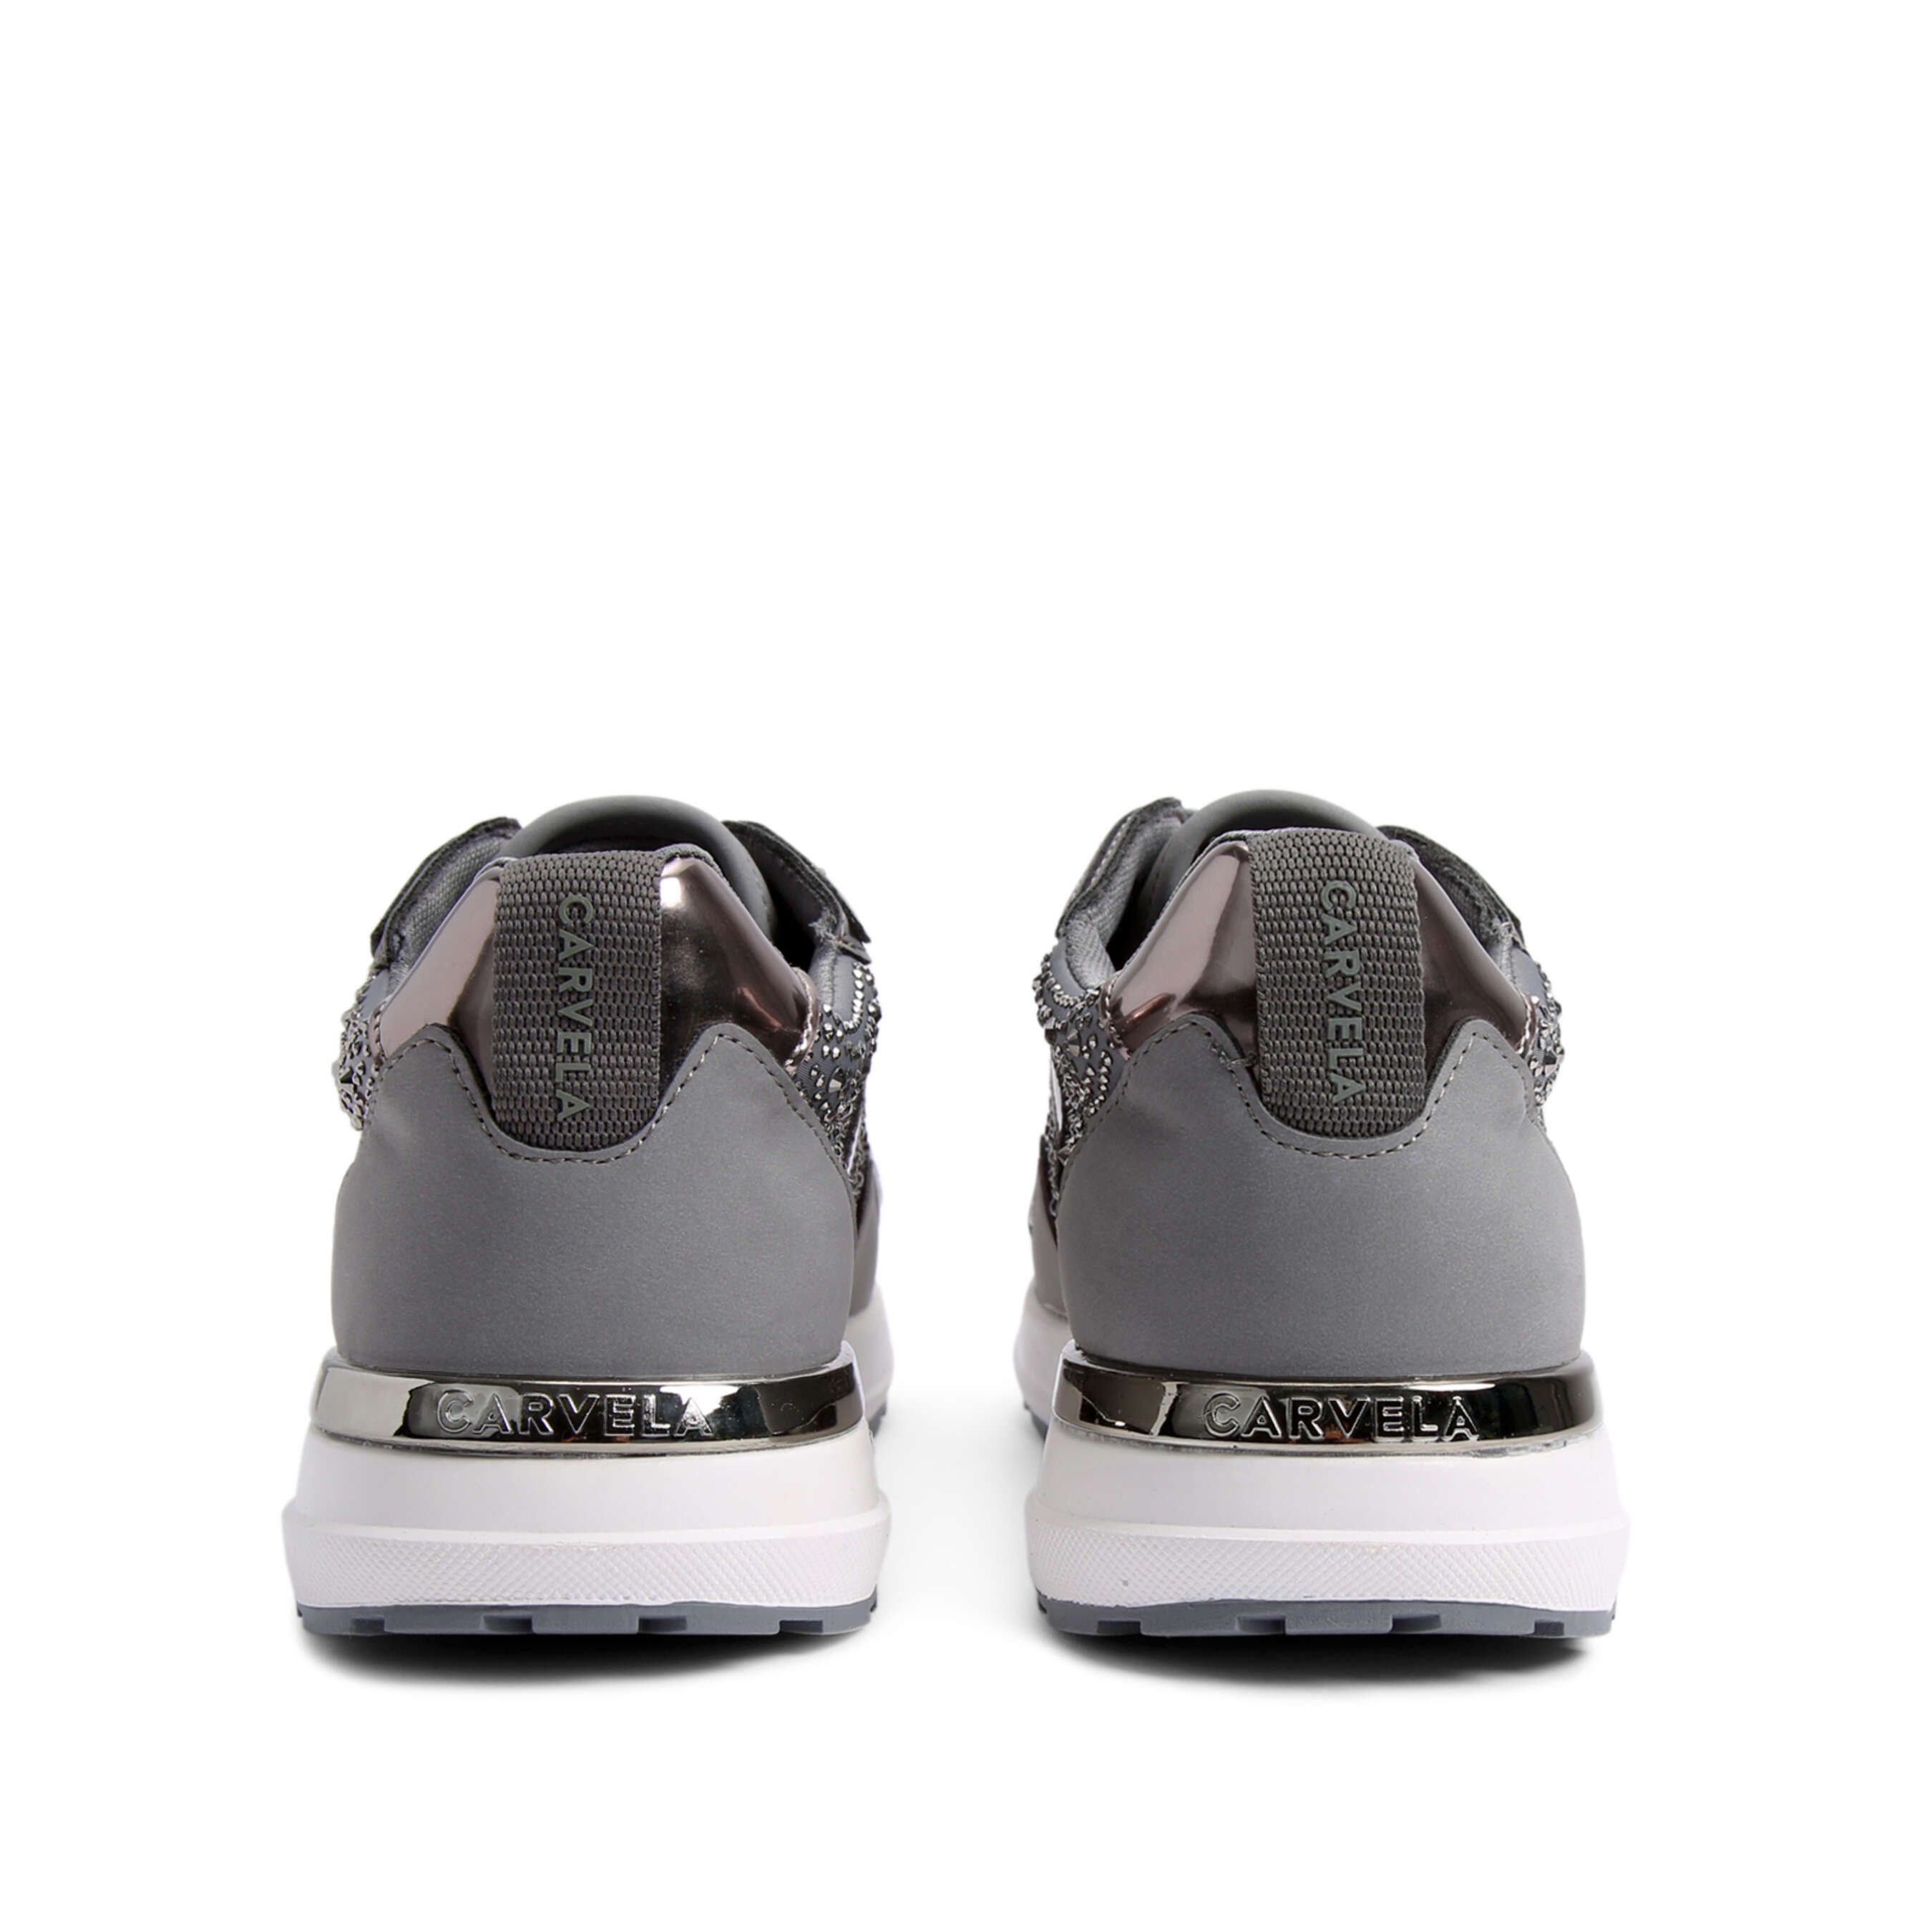 The Blink Jogger features a grey upper with crystal embellishment. There is a silver branded plate at the back of the ankle and the sole is in white.